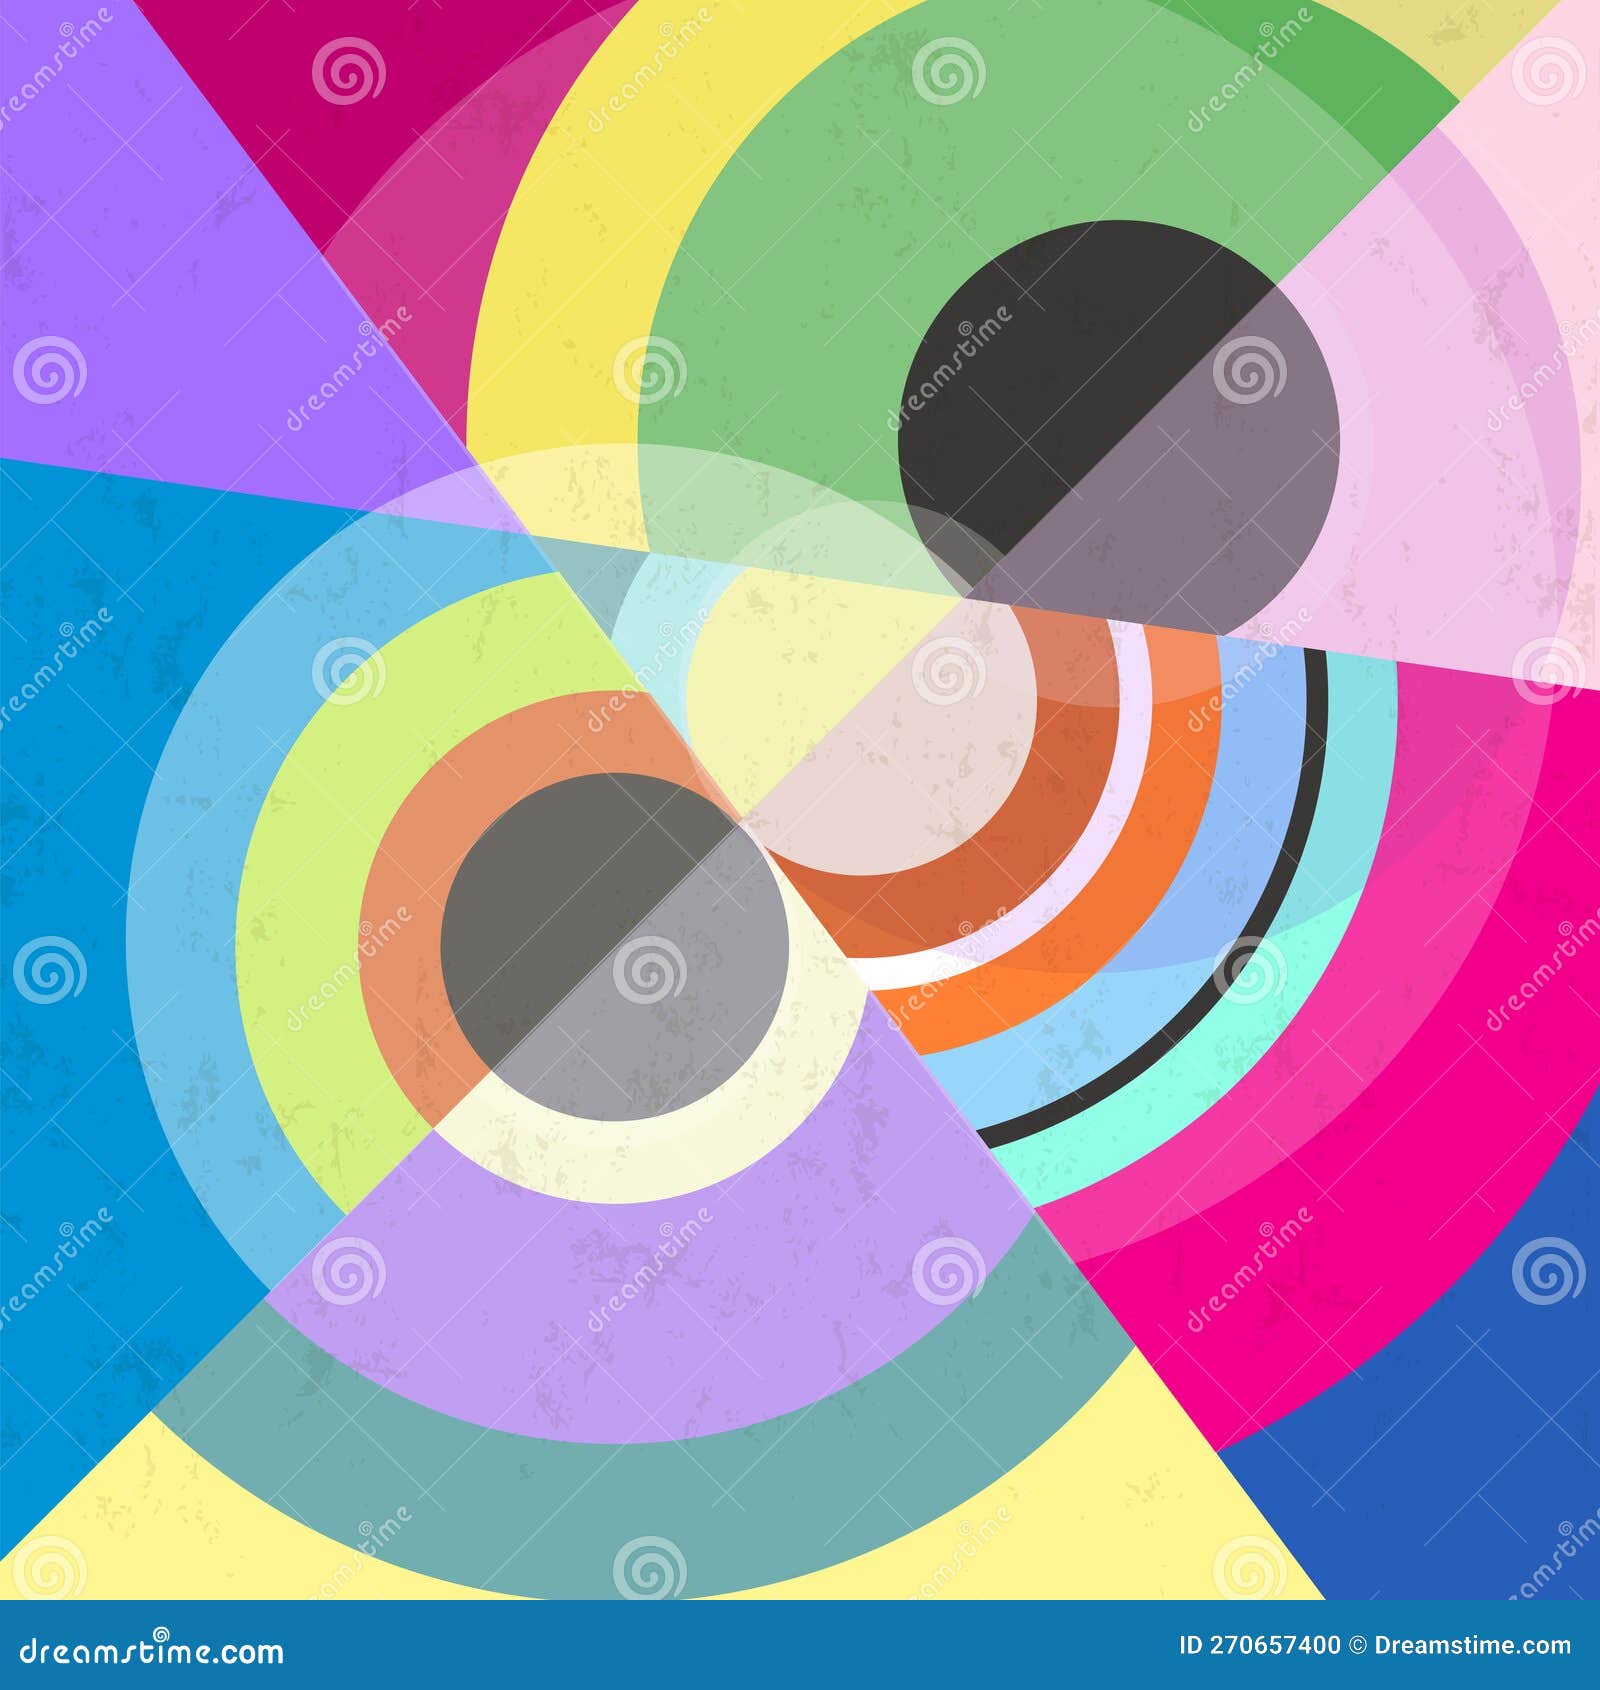 colorful abstract background composition, with circles, semicircles, paint strokes and splashes